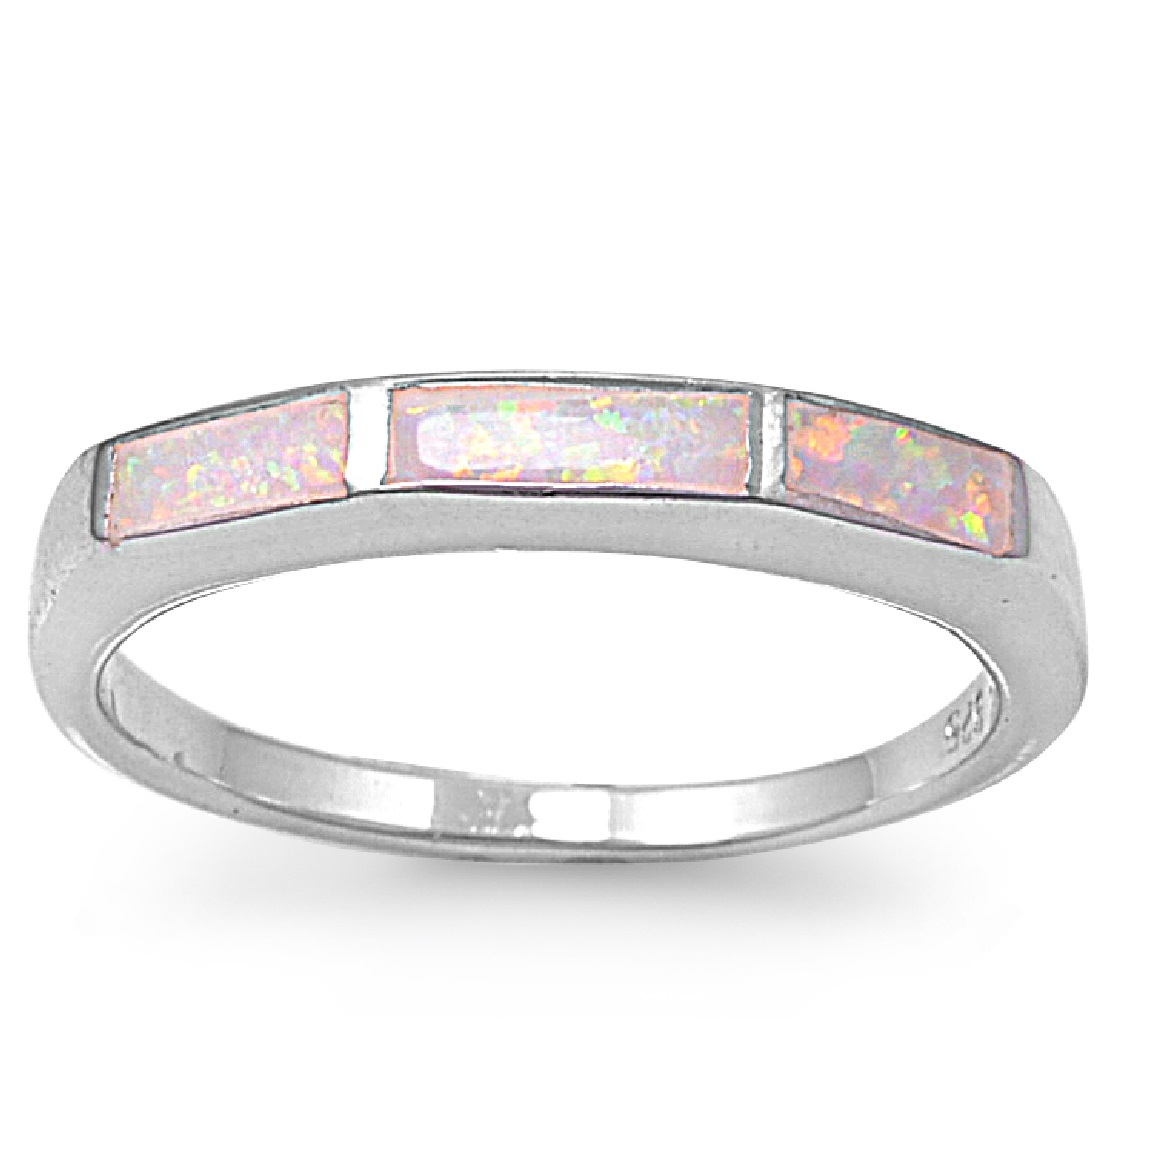 AllinStock Tri Rectangular Center Pink White Simulated Opal Ring Sterling Silver 